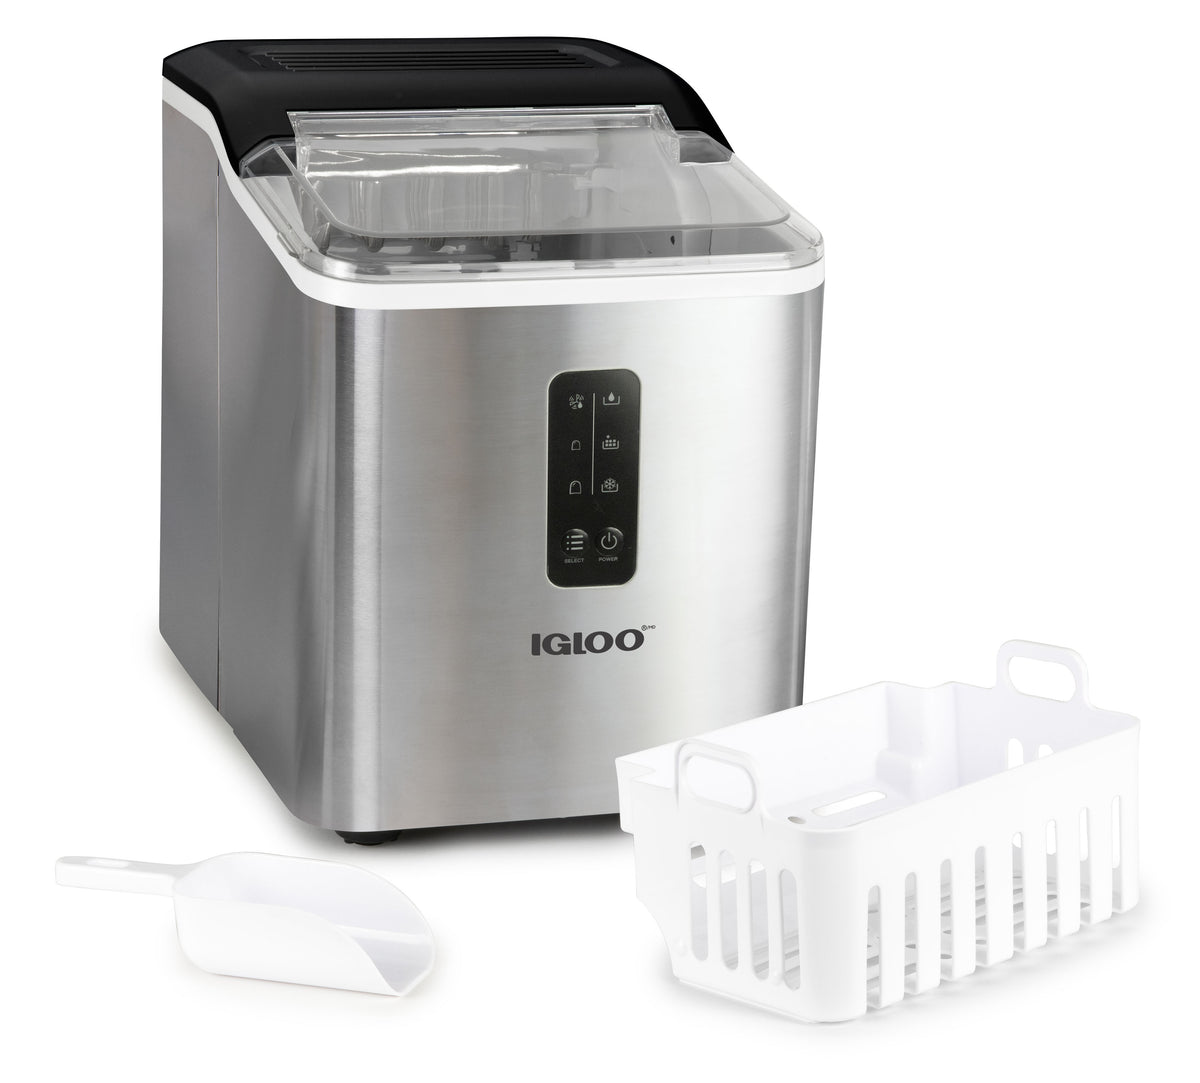 Igloo Self-Cleaning 26-Pound Ice Maker, Pink - 20654736